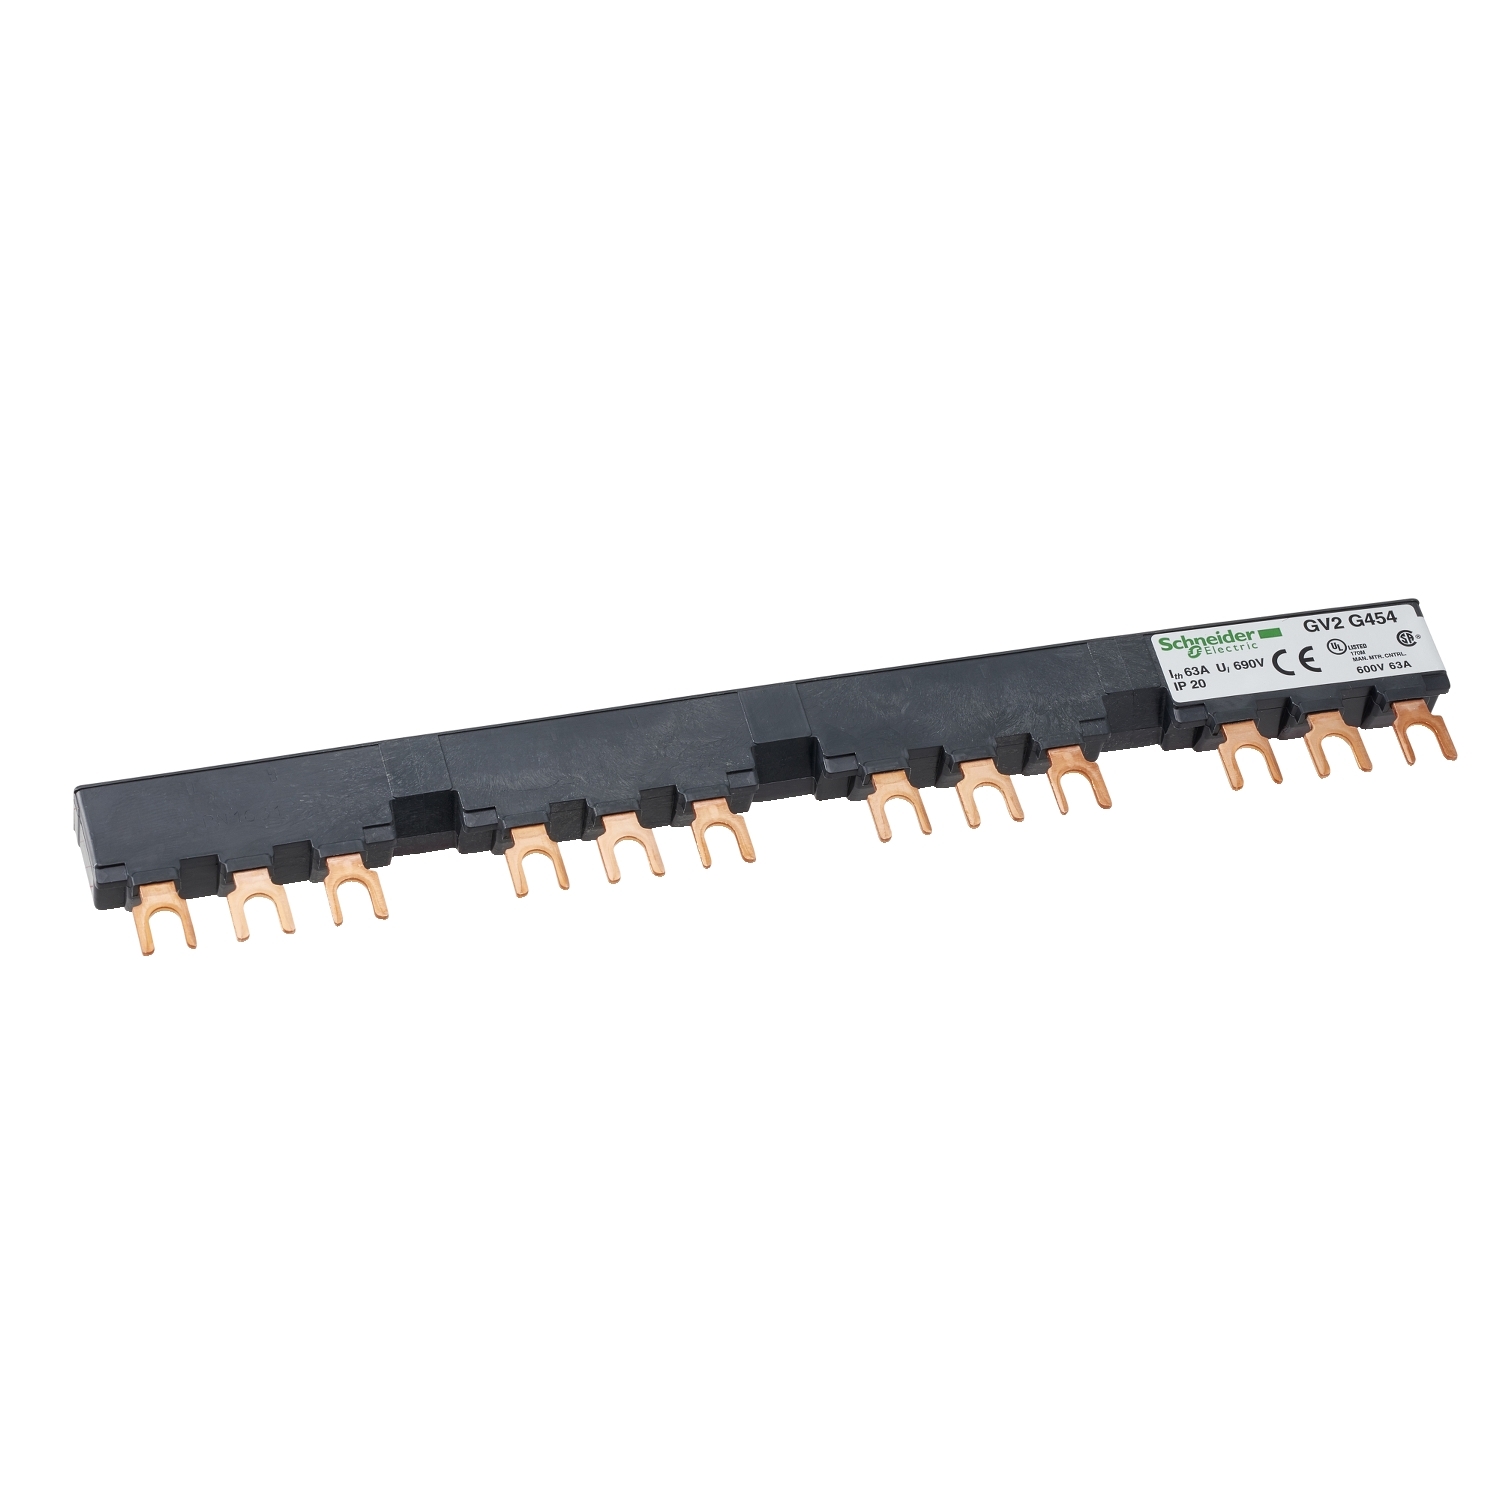 Linergy FT, Comb busbar, 63 A, 4 tap-offs, 54 mm pitch